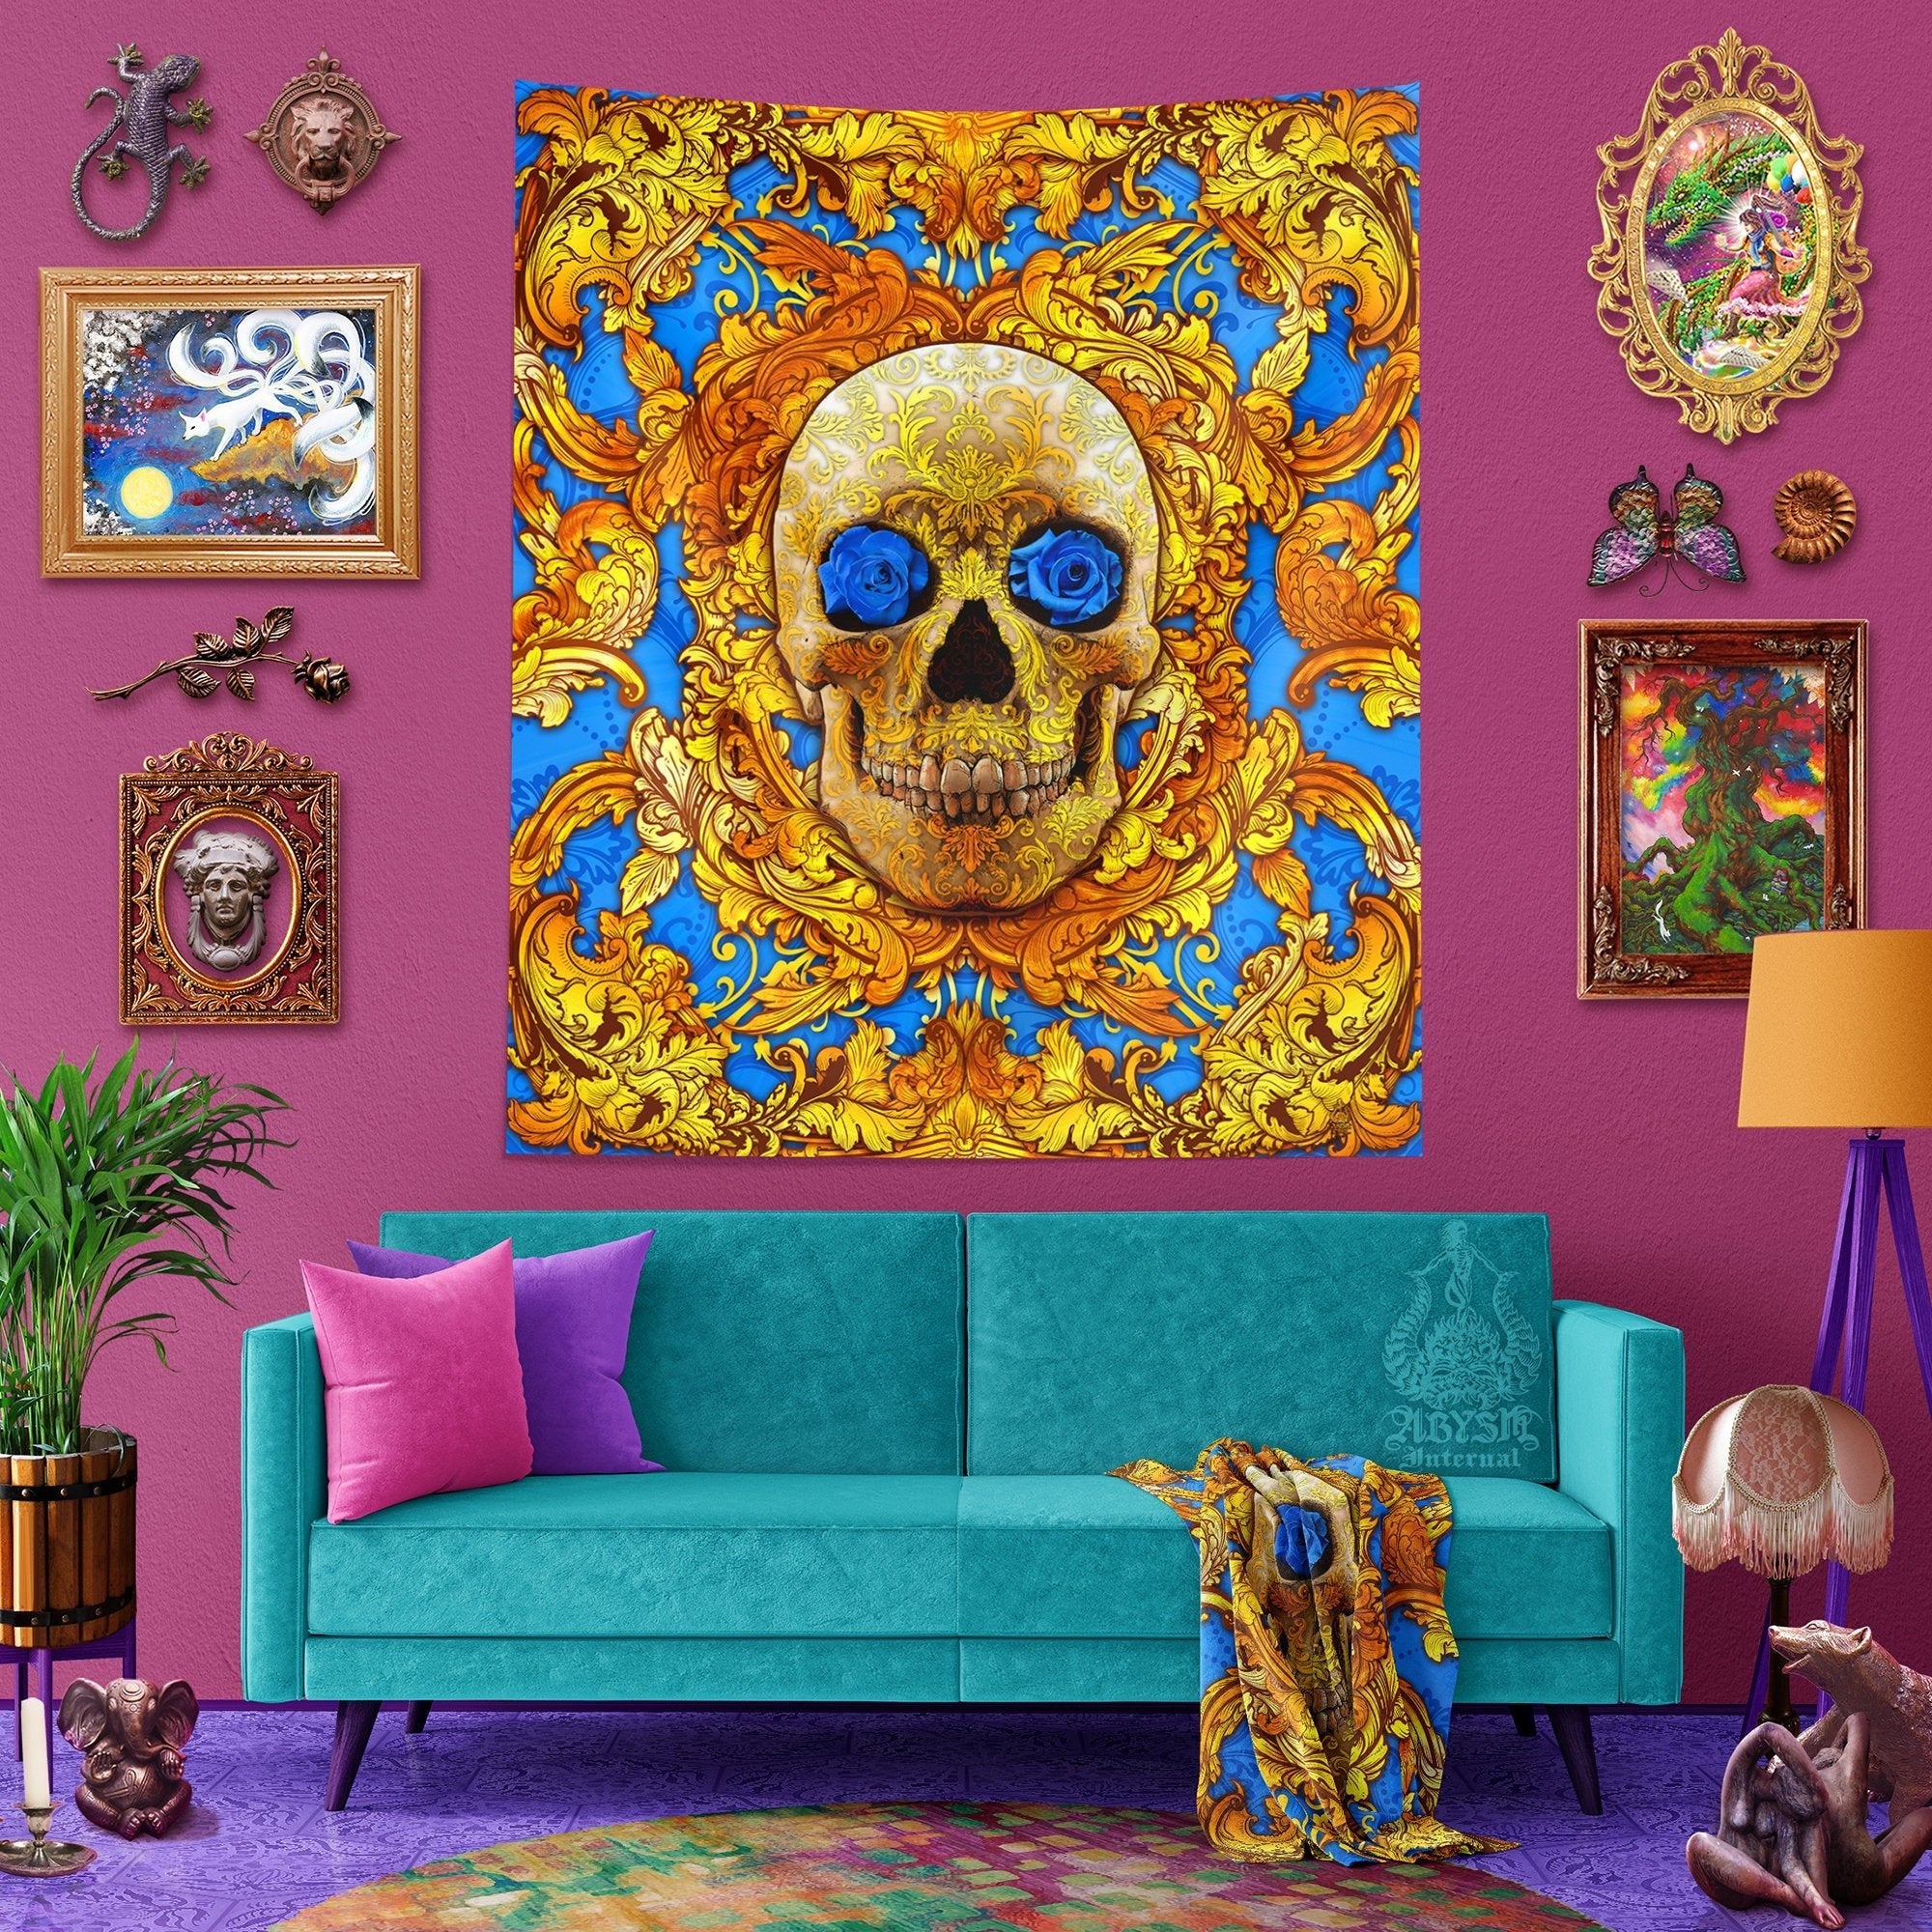 Skull Tapestry, Victorian Macabre Art Print, Baroque Decor, Eclectic and Funky - Vintage Ornaments, Cyan & Gold - Abysm Internal